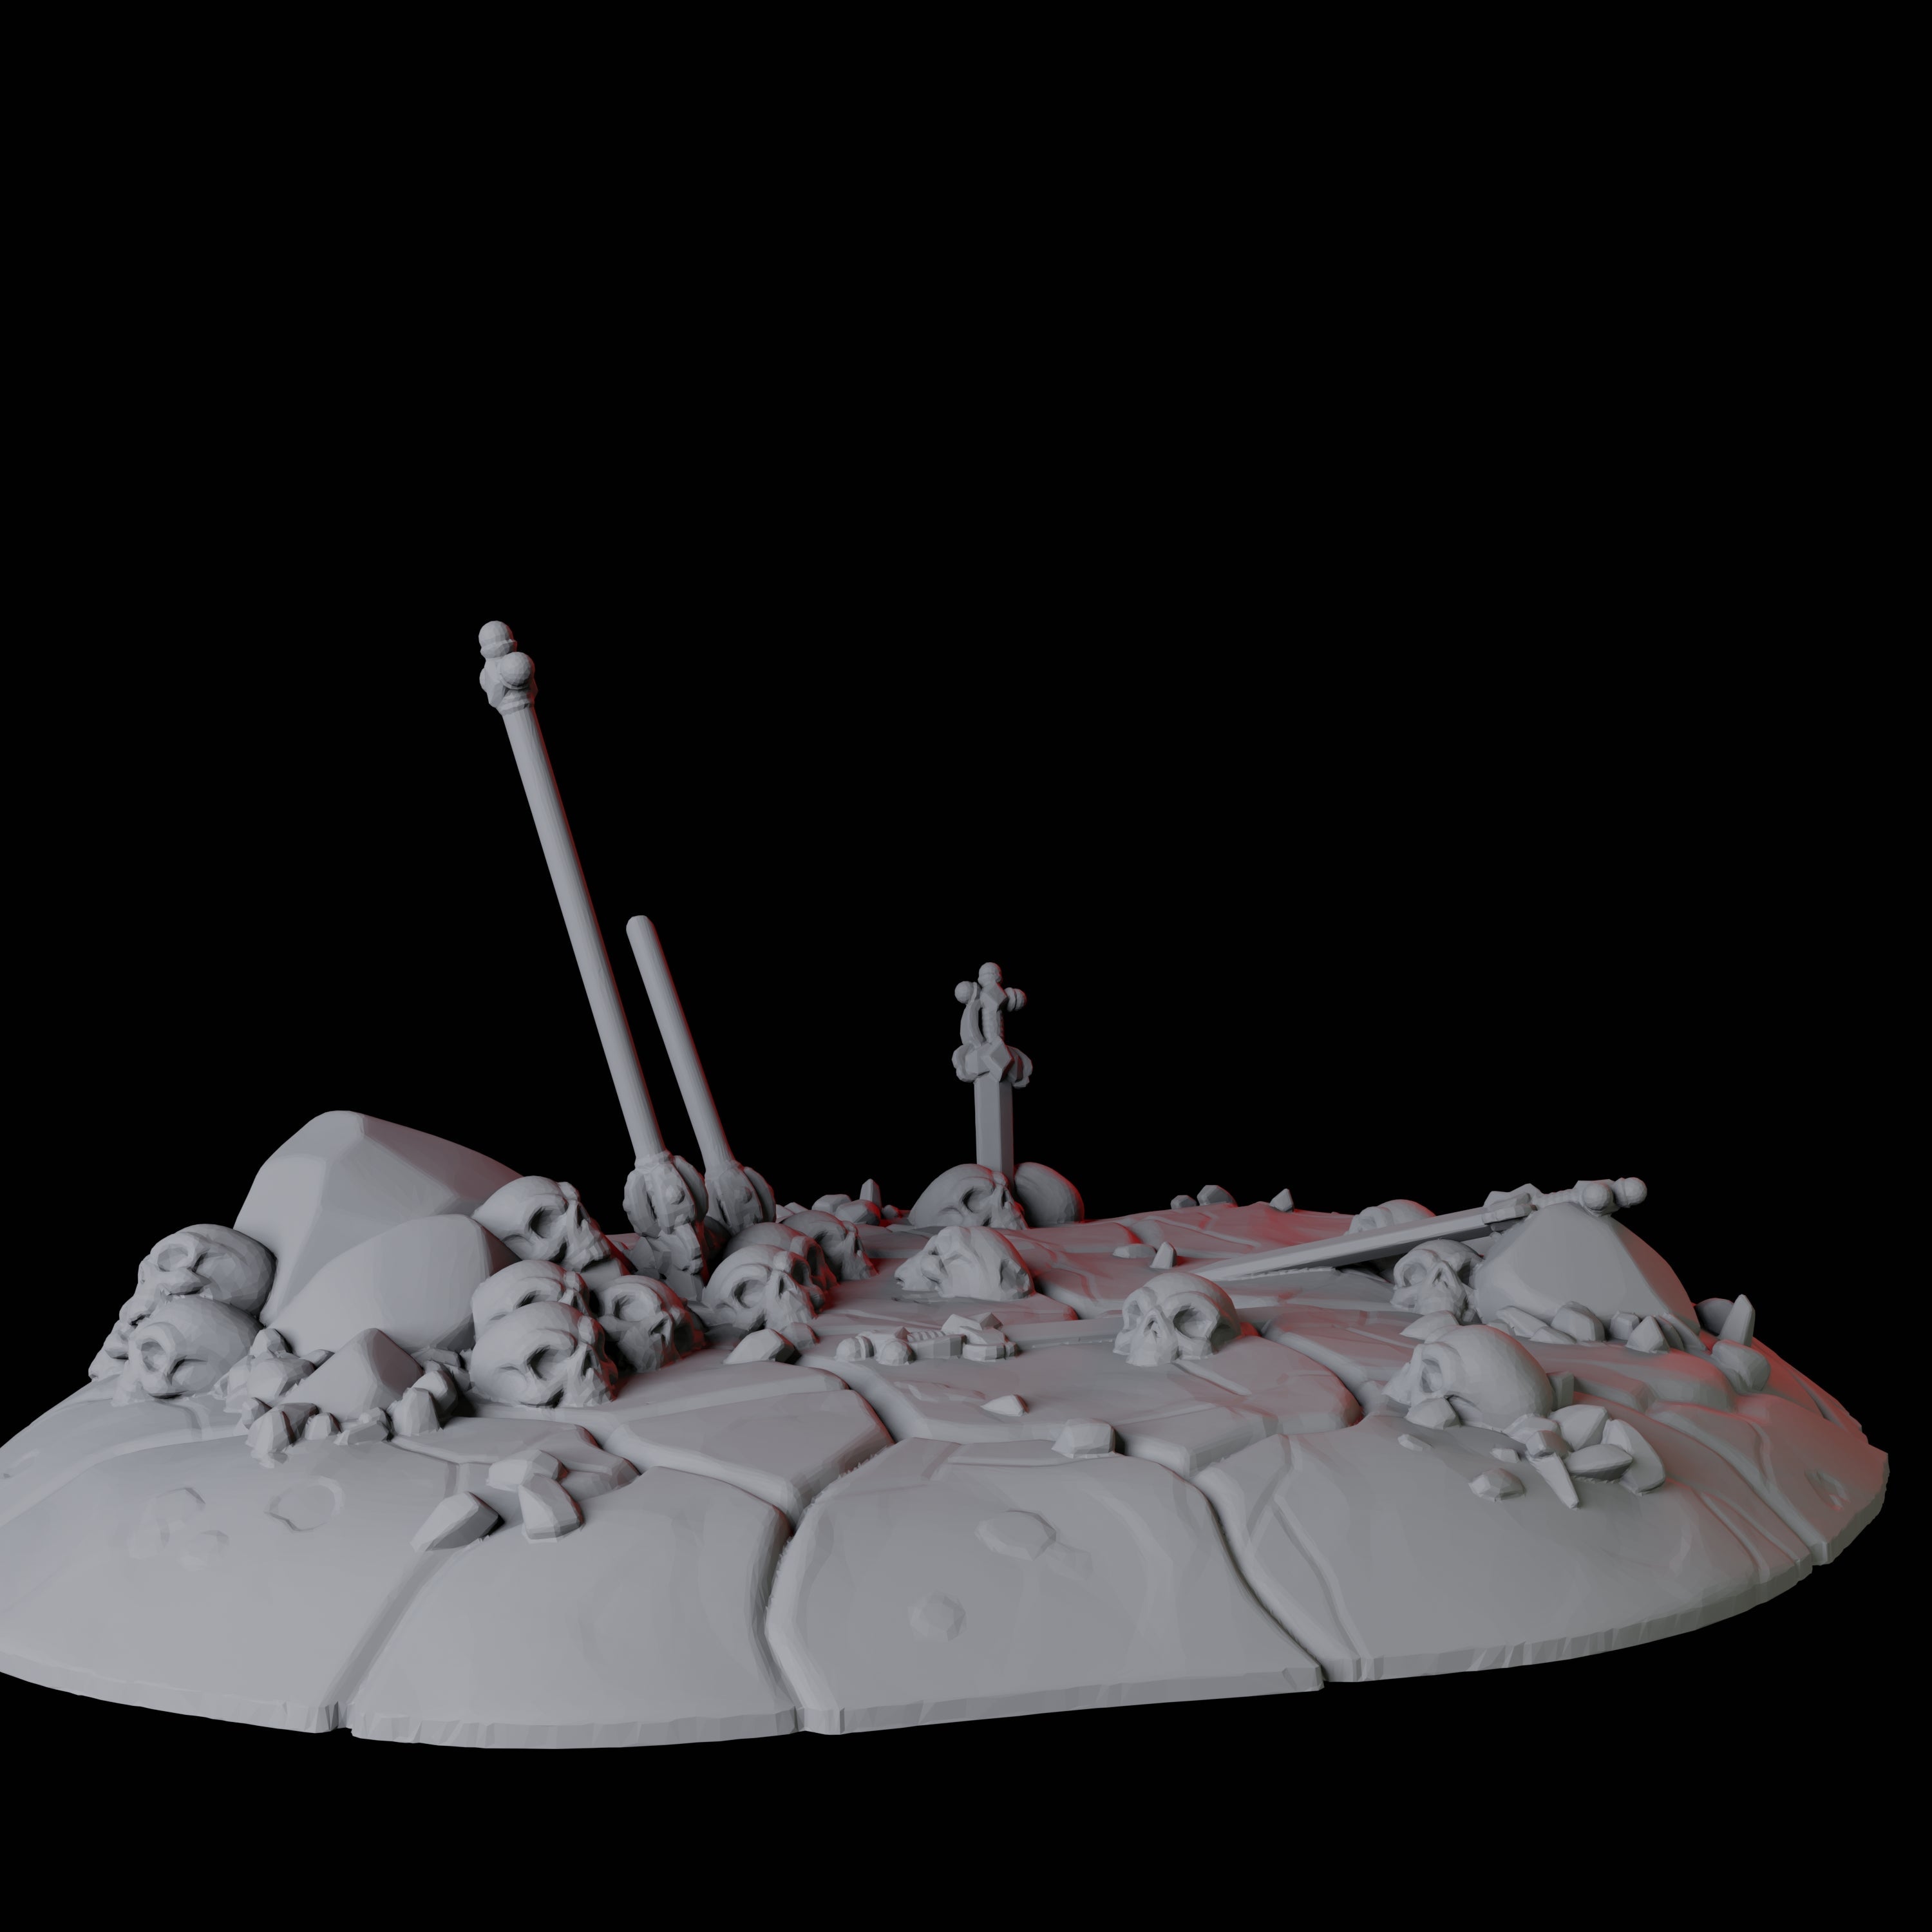 Hellscape Terrain Piece G Miniature for Dungeons and Dragons, Pathfinder or other TTRPGs